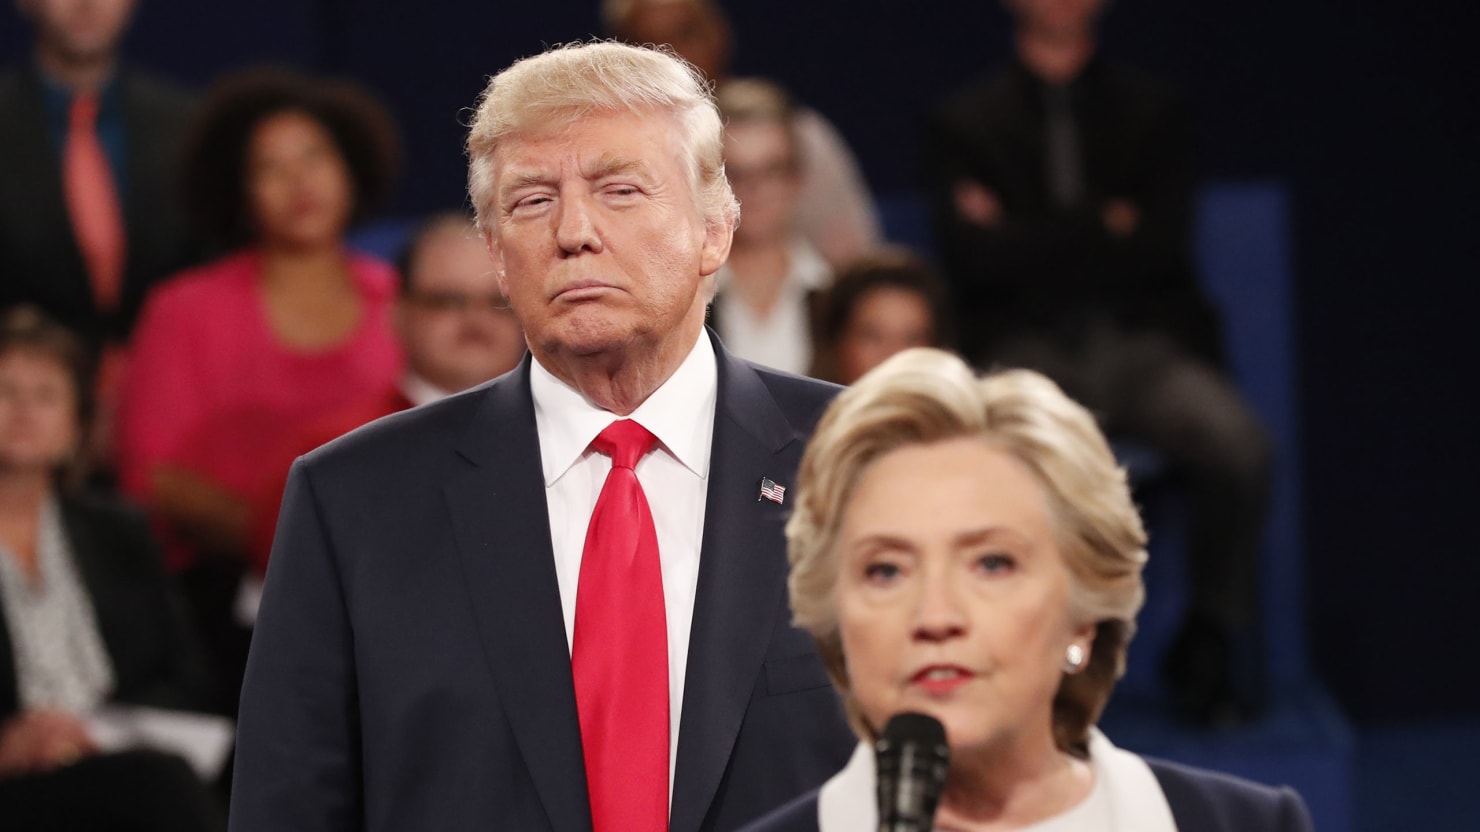 Donald Trump: Hillary Clinton Will ‘Be in Jail’ if I’m Elected